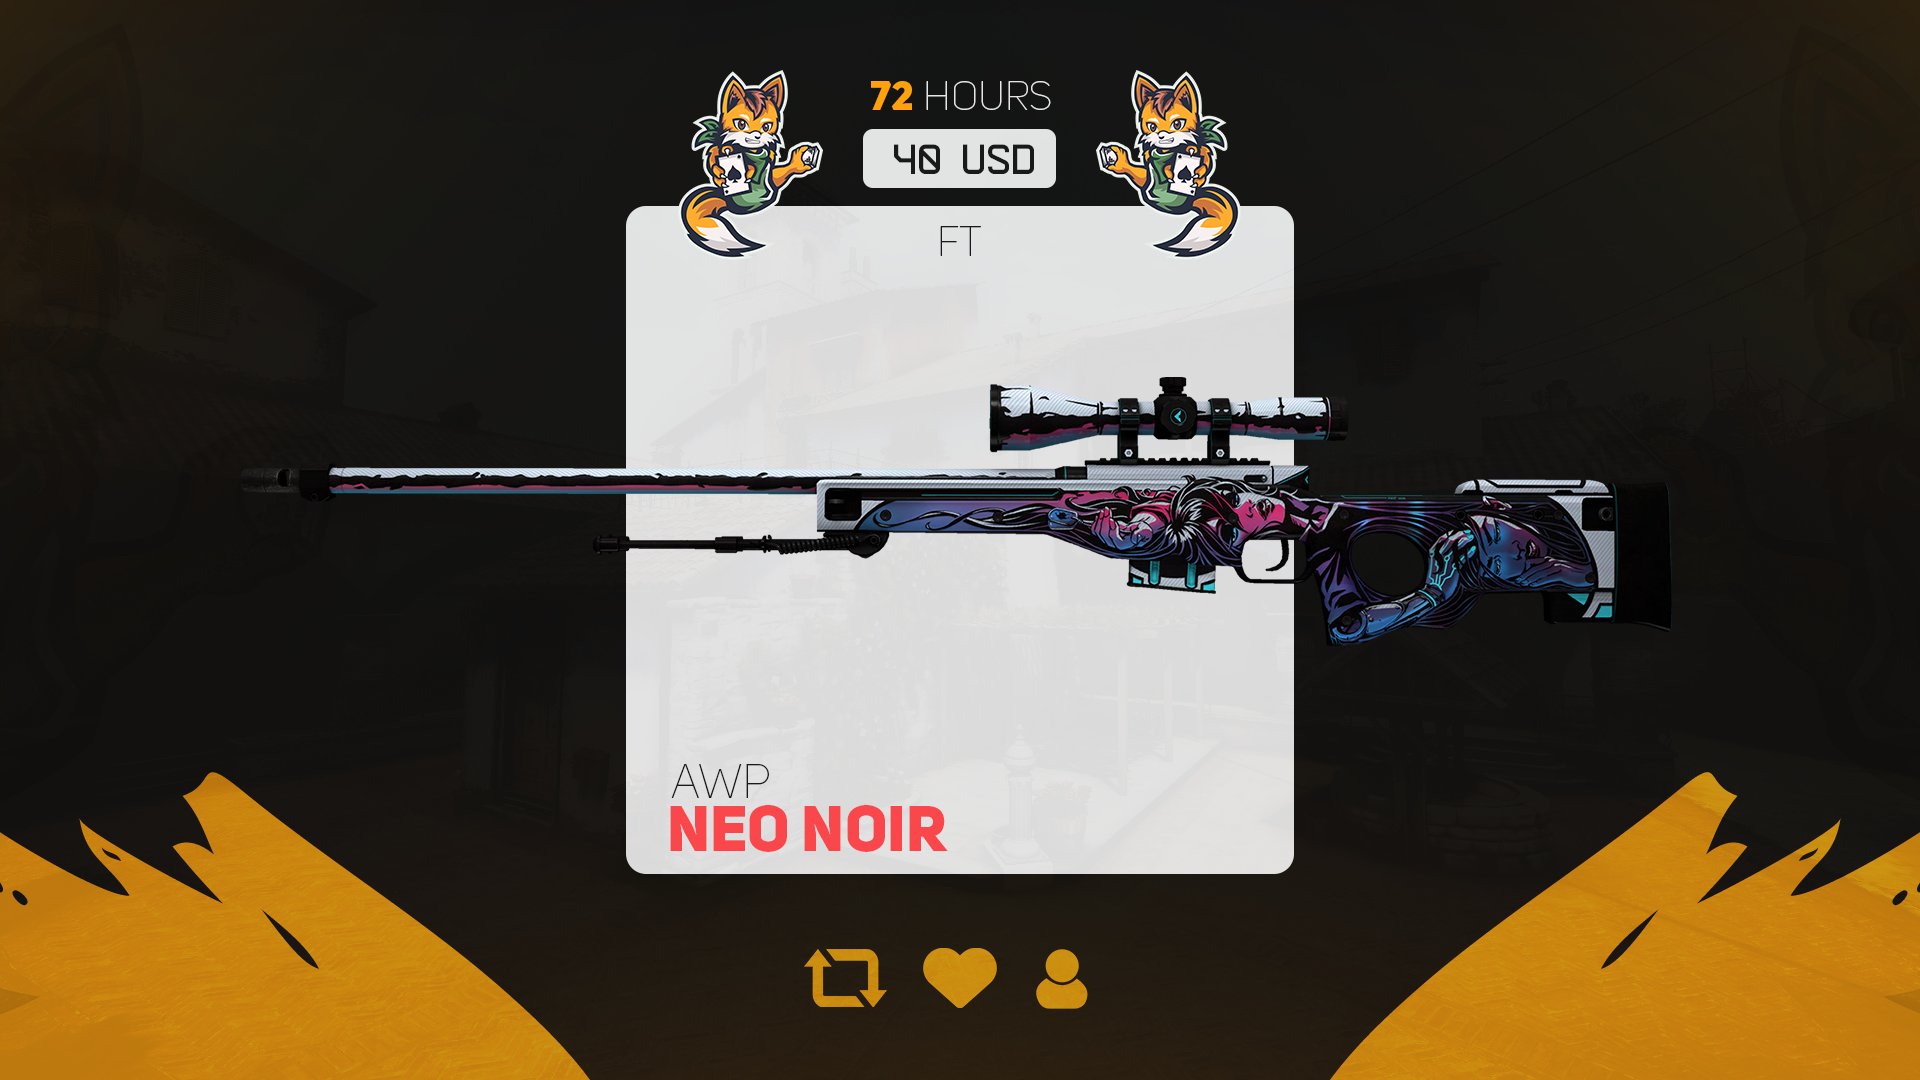 Alarmerende Frem Misvisende Snugtoes - Lukas on Twitter: "🐱40$ AWP | Neo-Noir FT GIVEAWAY🐱 ✓RETWEET +  FOLLOW ✓LIKE THIS VIDEO(PROOF): https://t.co/VpKnoc5T3X 🐱ENDS IN 72  HOURS🐱 #CSGO #CSGOGiveaway https://t.co/HiikOsRFOf" / Twitter